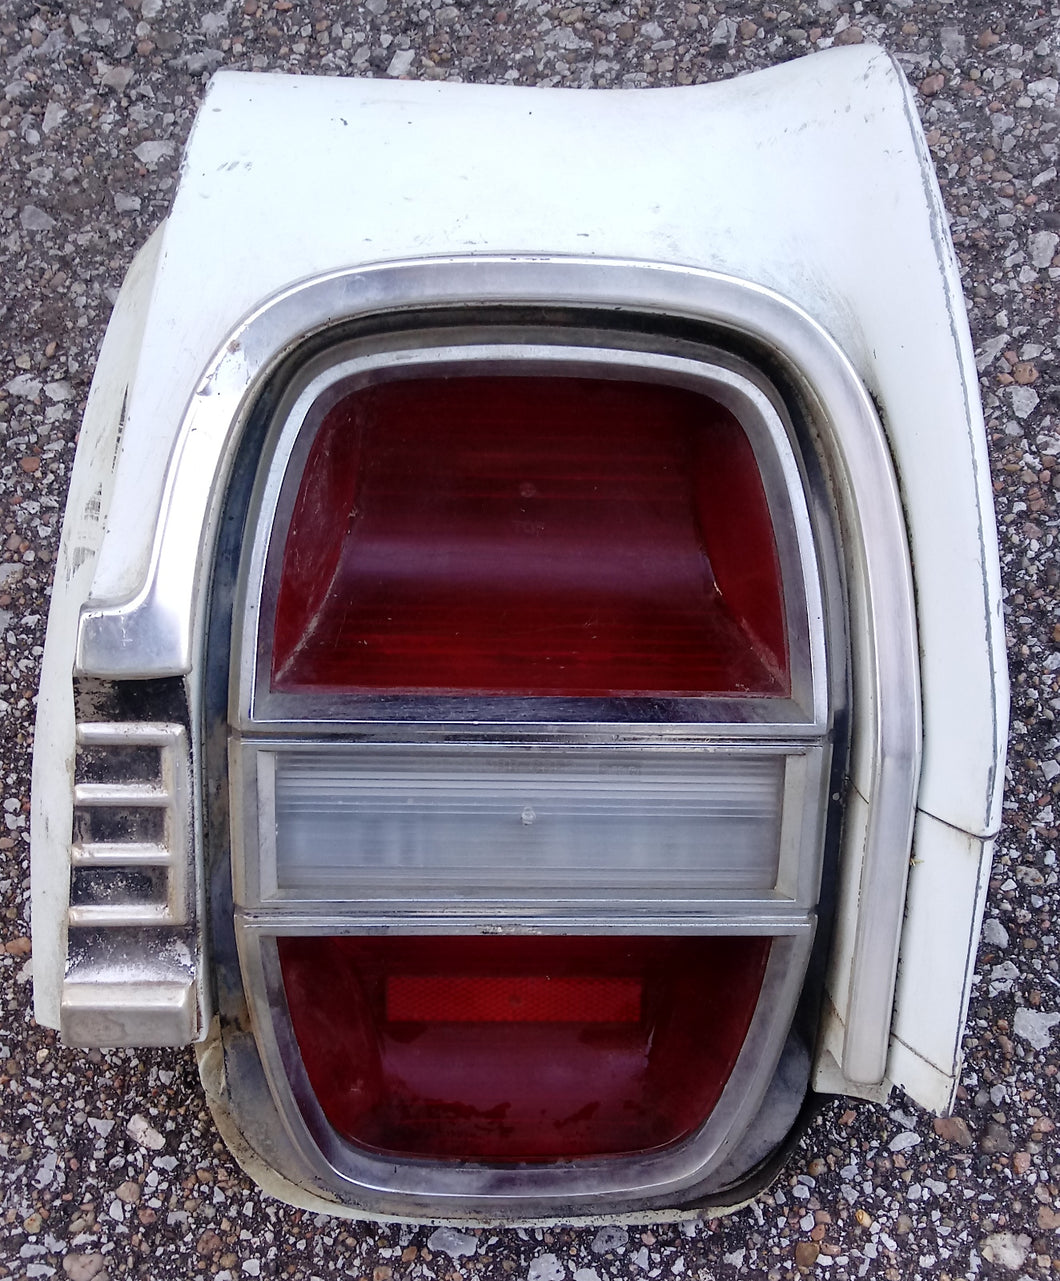 1968 Ford Galaxie taillight assembly quarter extension passenger side